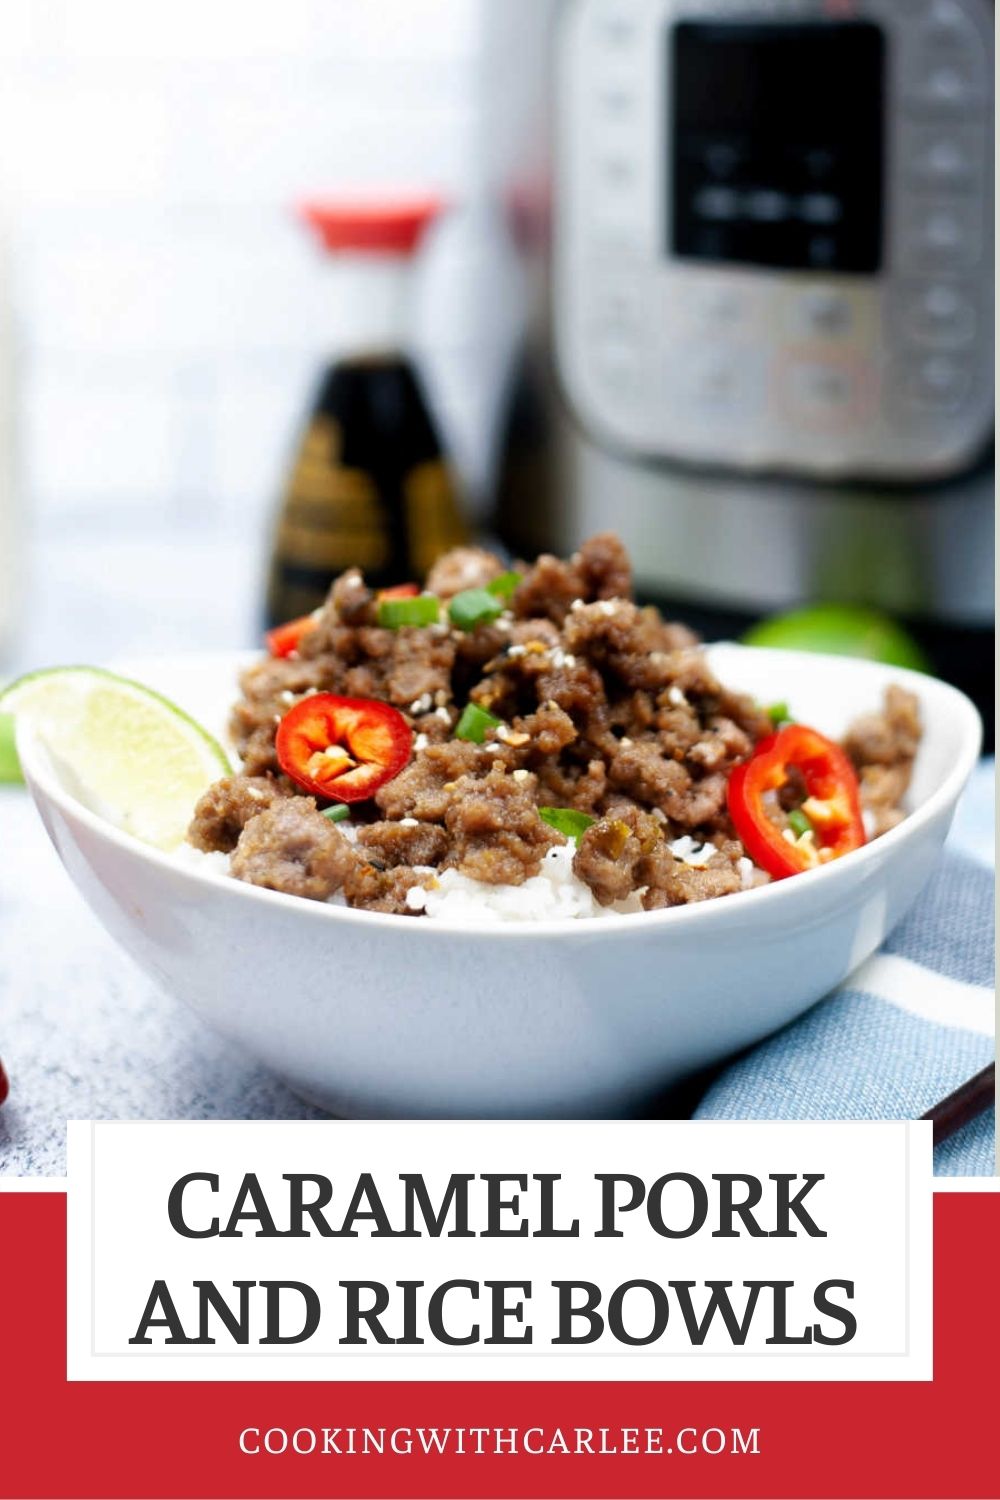 This pork is slightly sweet and a little bit spicy. You can make these caramel pork and rice bowls in the instant pot for a quick and easy meal!